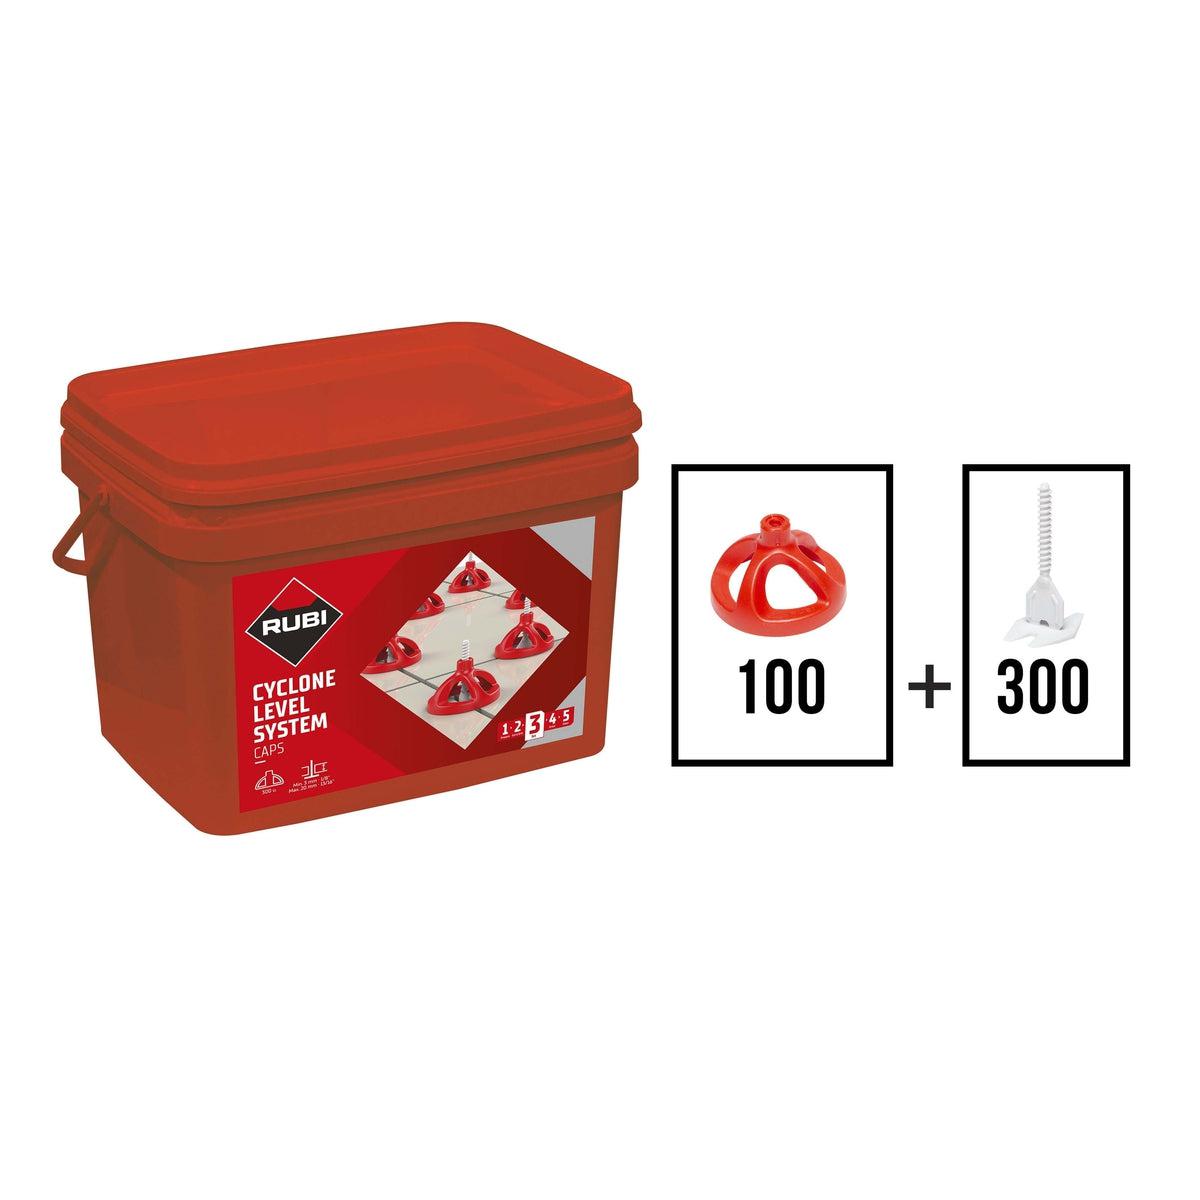 RUBI Tools Cyclone Level System 1/16" (1.5mm) Kit (100 caps + 300 bases)